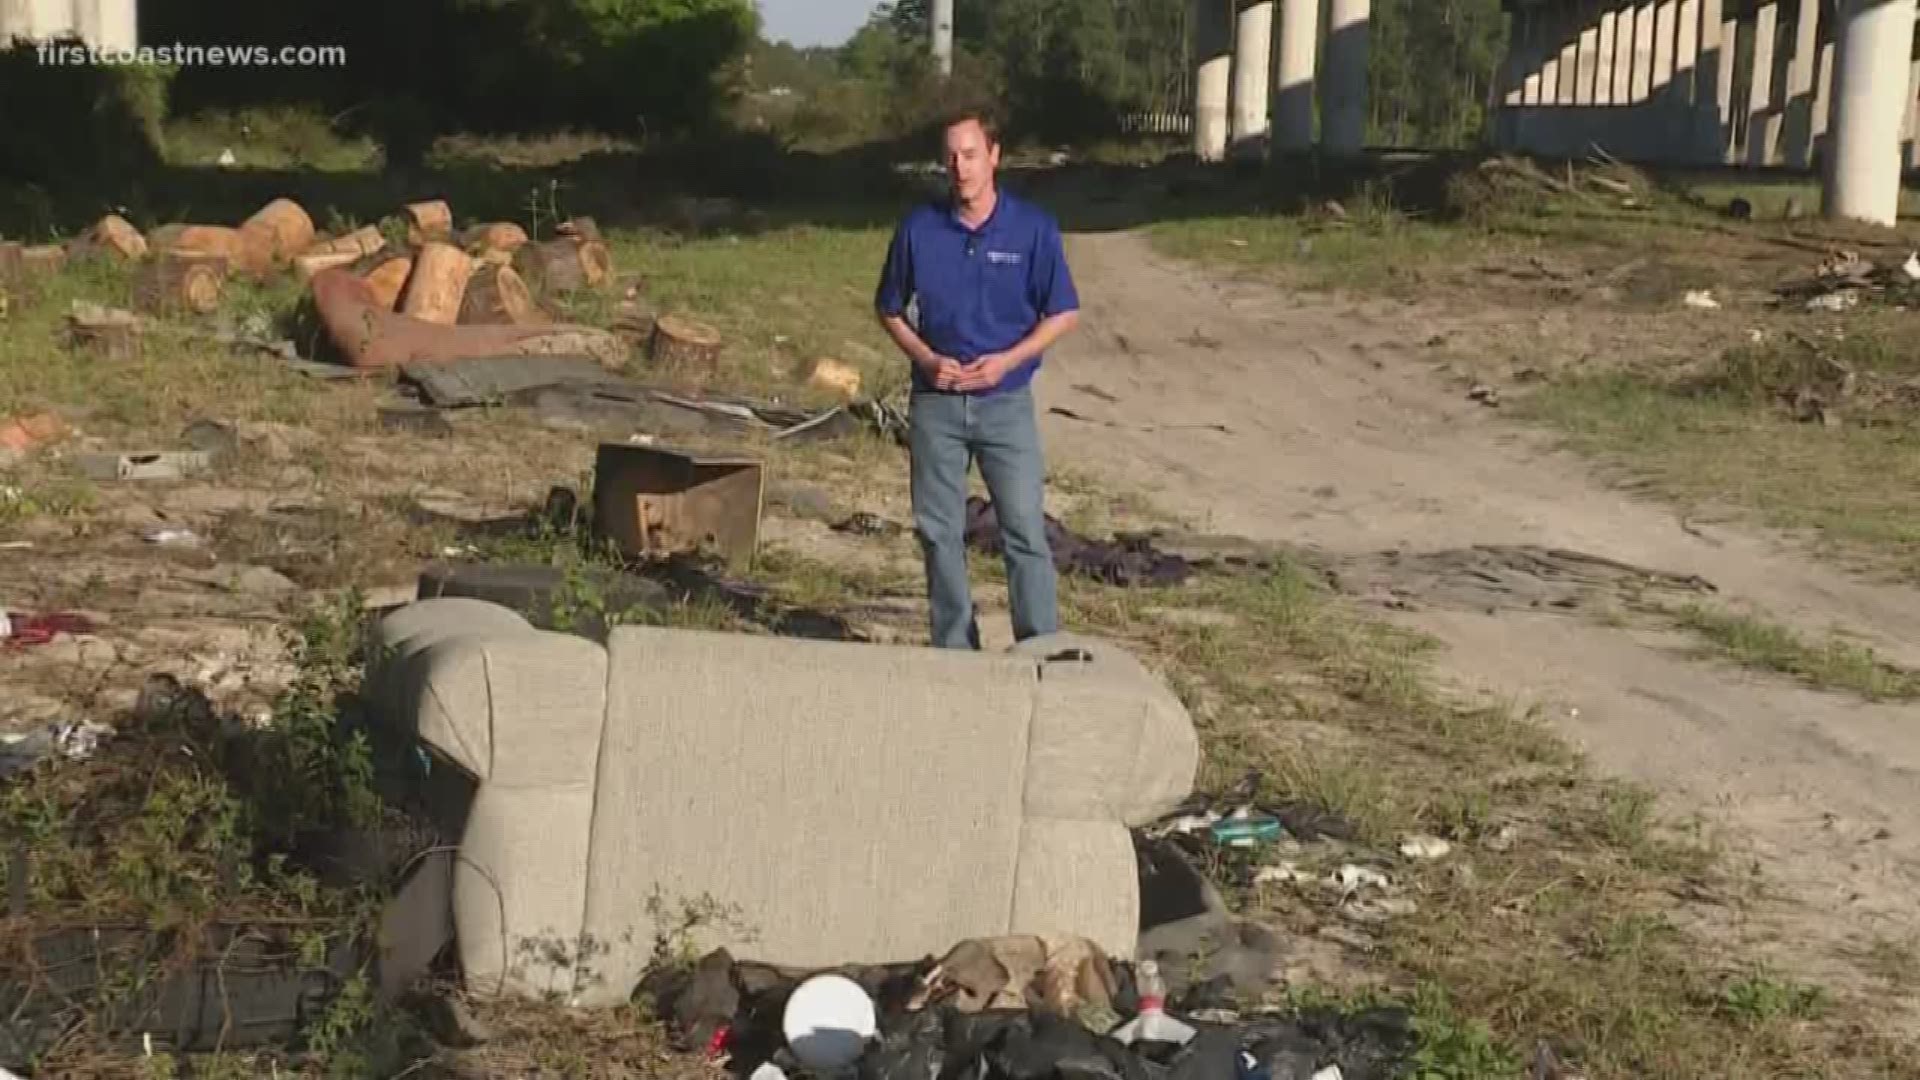 Free couches, televisions, and bicycles. There’s only one problem: a Jacksonville homeowner says those items were collected over the years in an illegal dumping site.